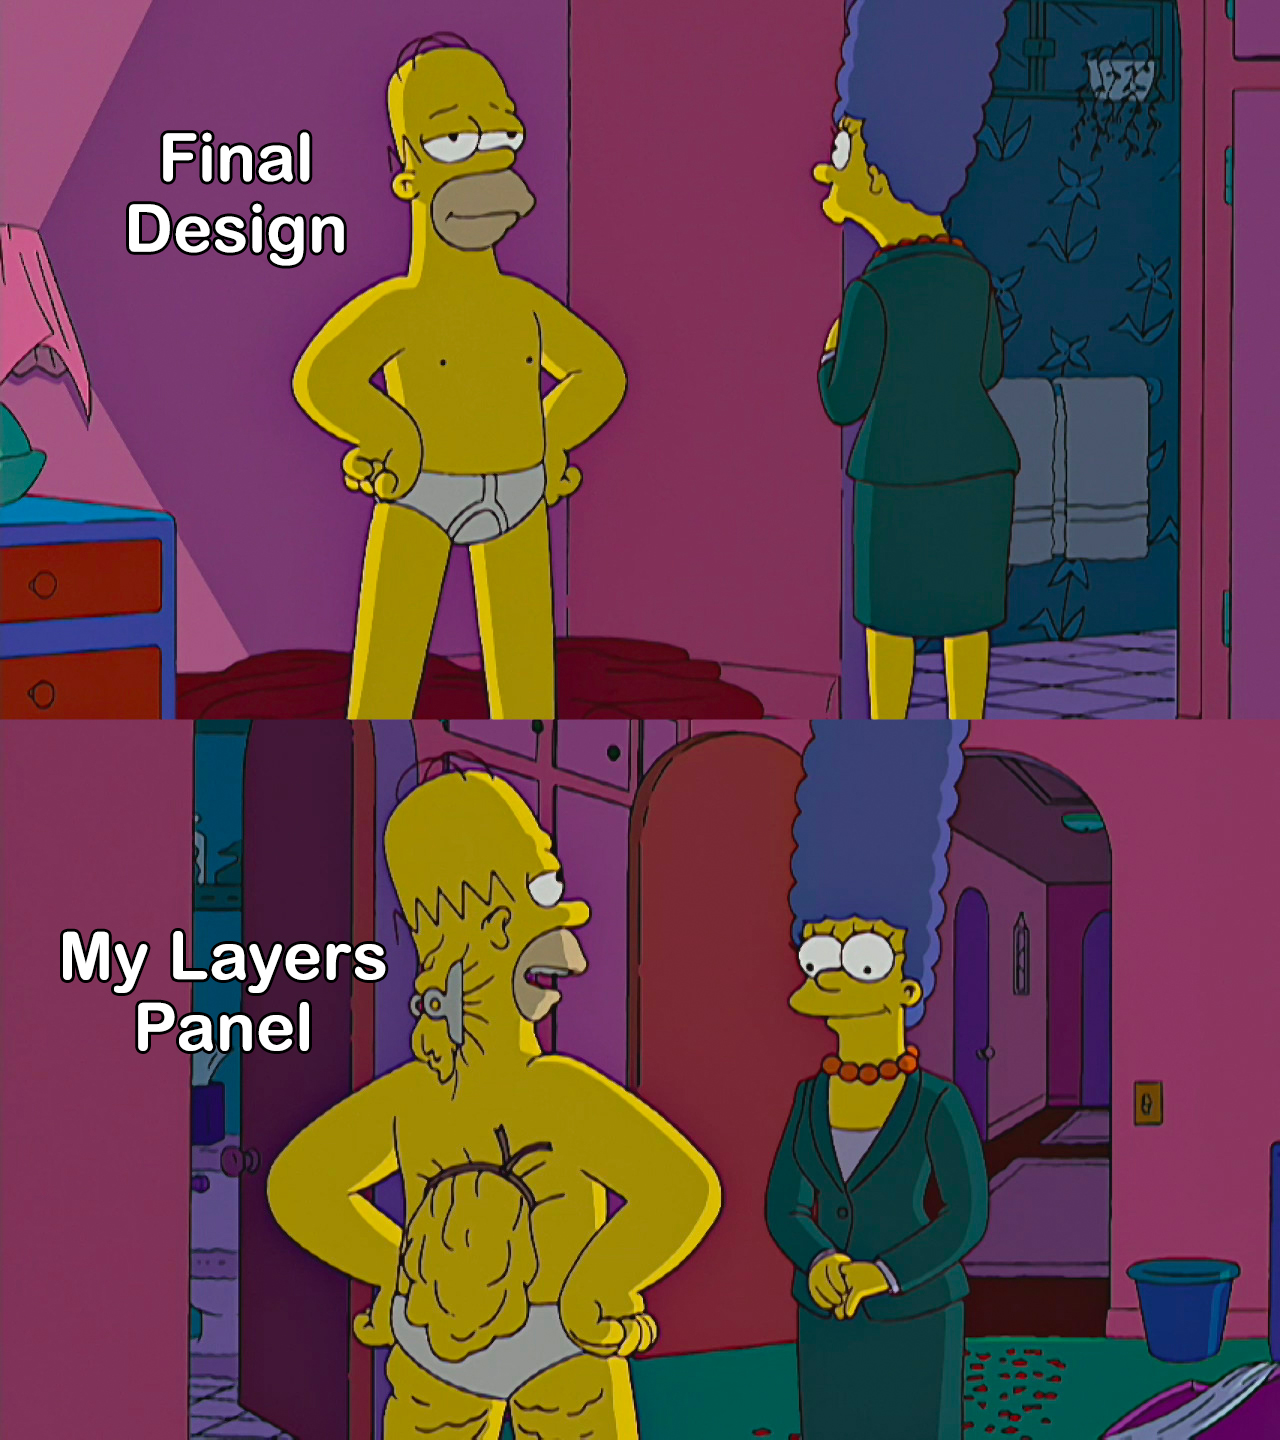 Final Design vs. My Layers Panel (Homer & Marge Simpson)